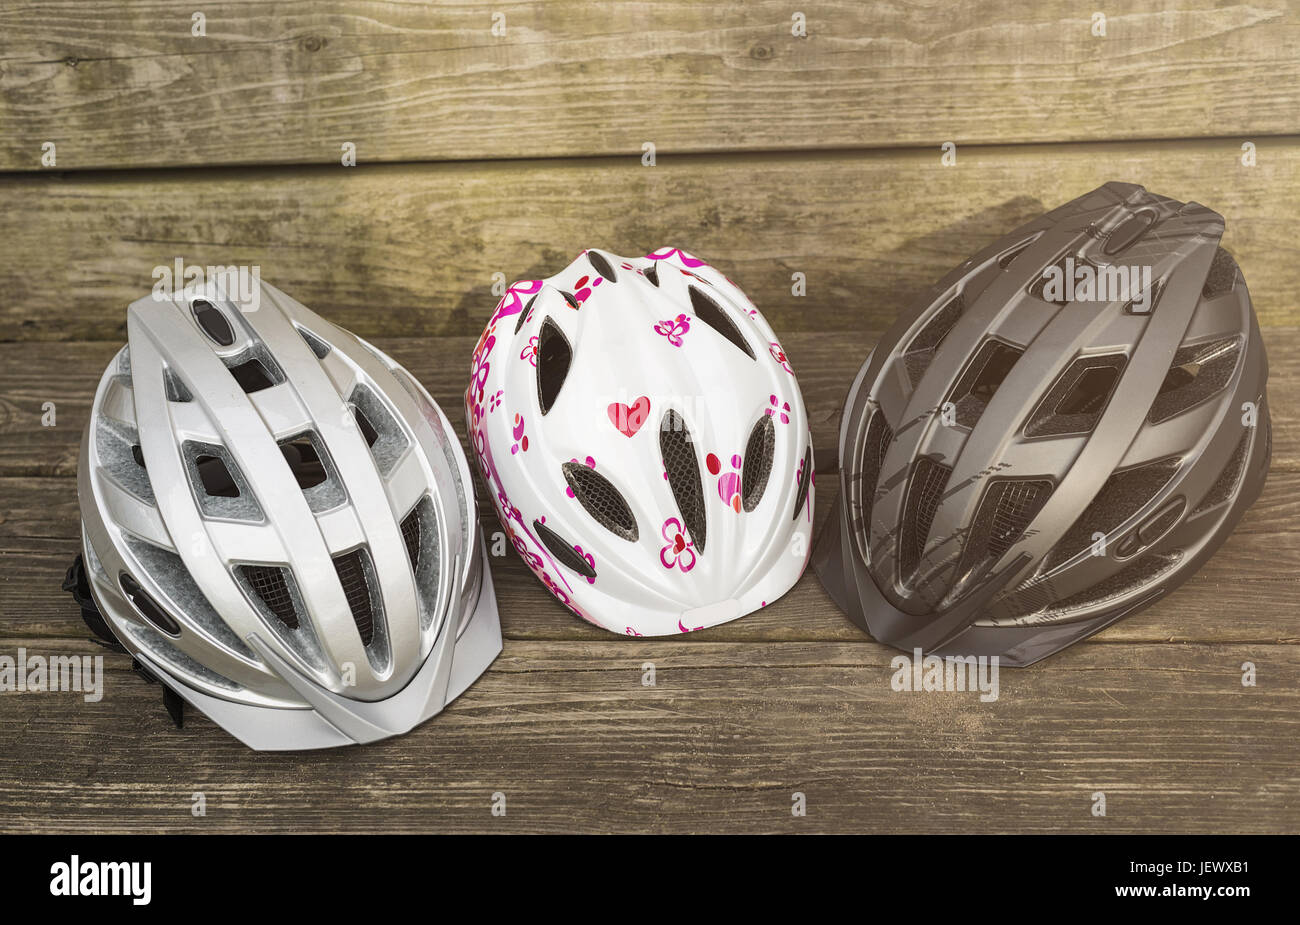 different bicycle helmets Stock Photo